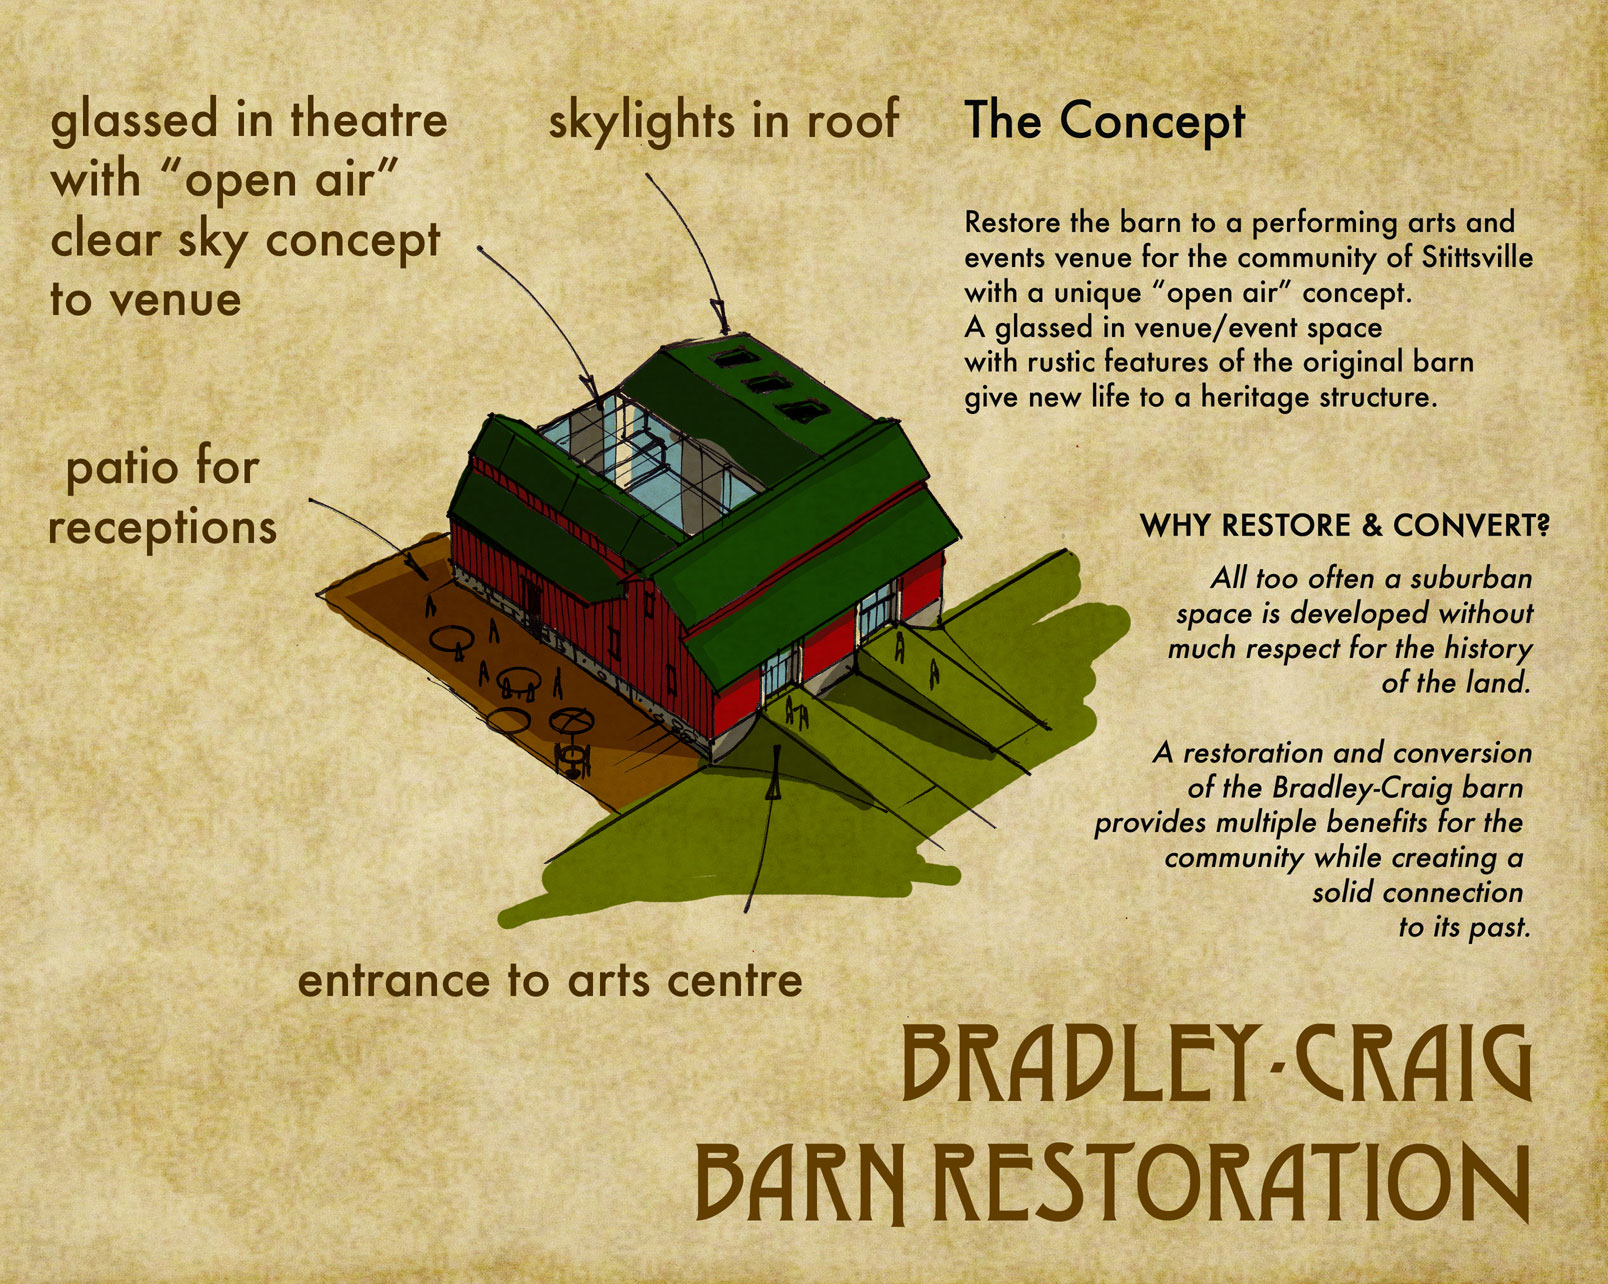 Bradley-Craig Re-imagined. Concept drawing by Andrew King.